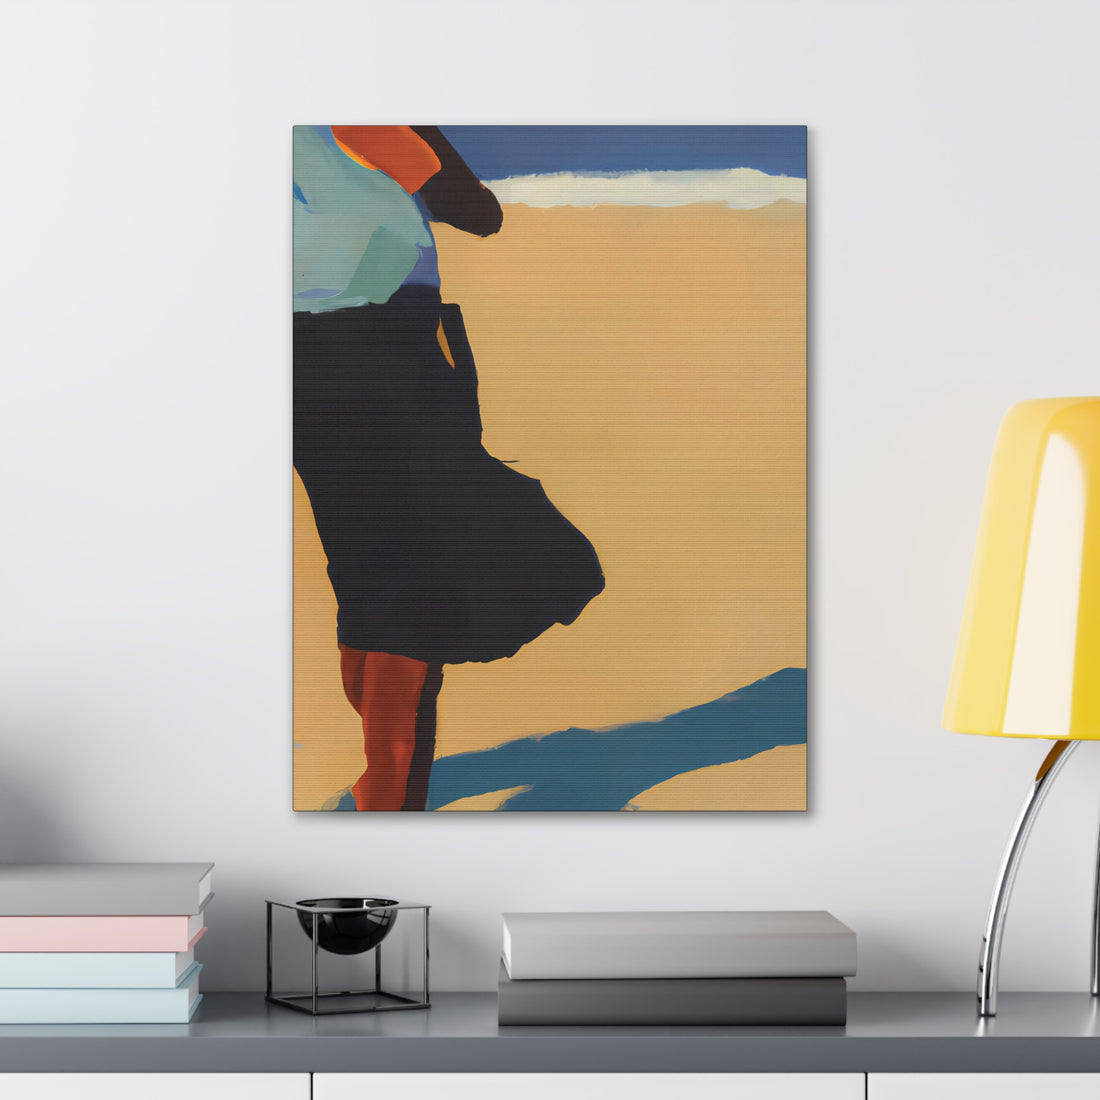 Optimistic, Fluid Series | Wrapped CANVAS | Black art for the home, African American contemporary art, Black artist prints, modern, minimal